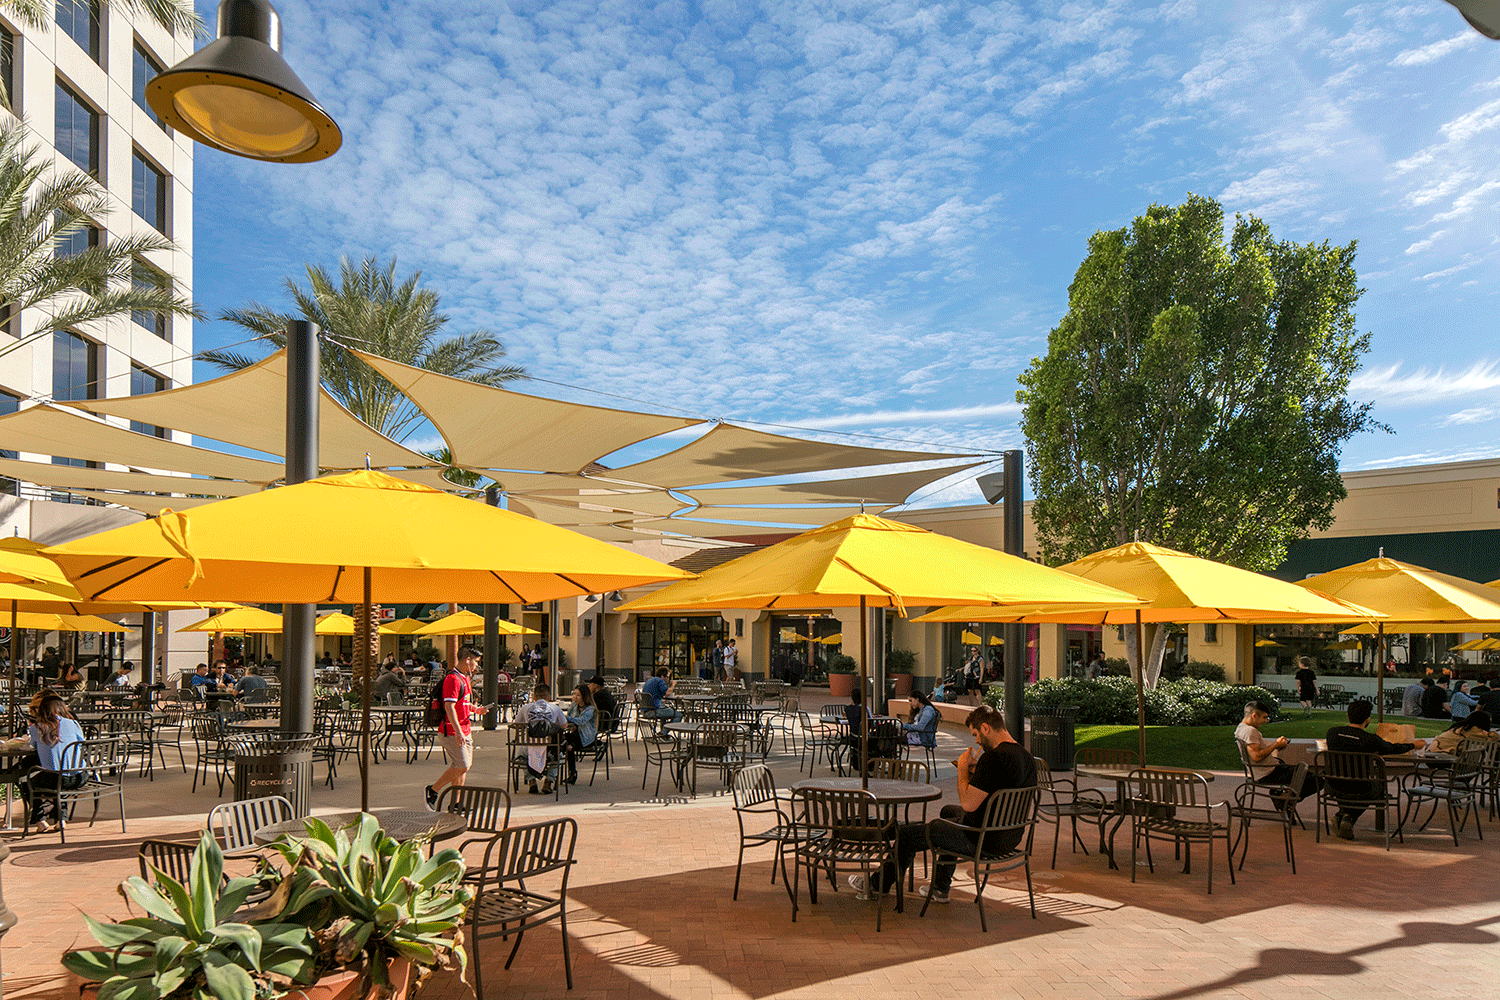  View of Central Patio at University Center